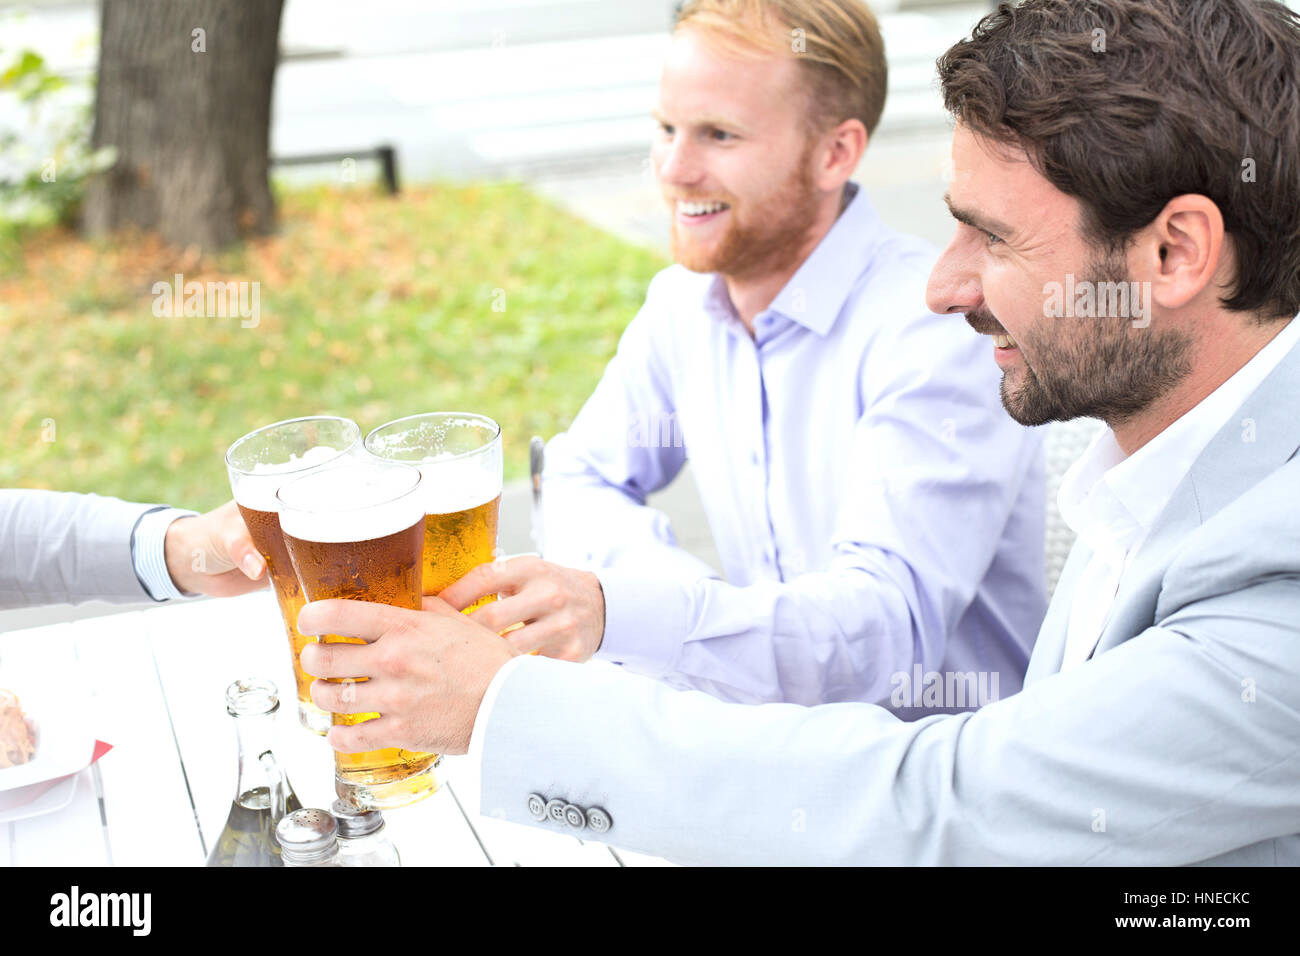 Businessmen toasting beer glasses with female colleague at outdoor restaurant Stock Photo